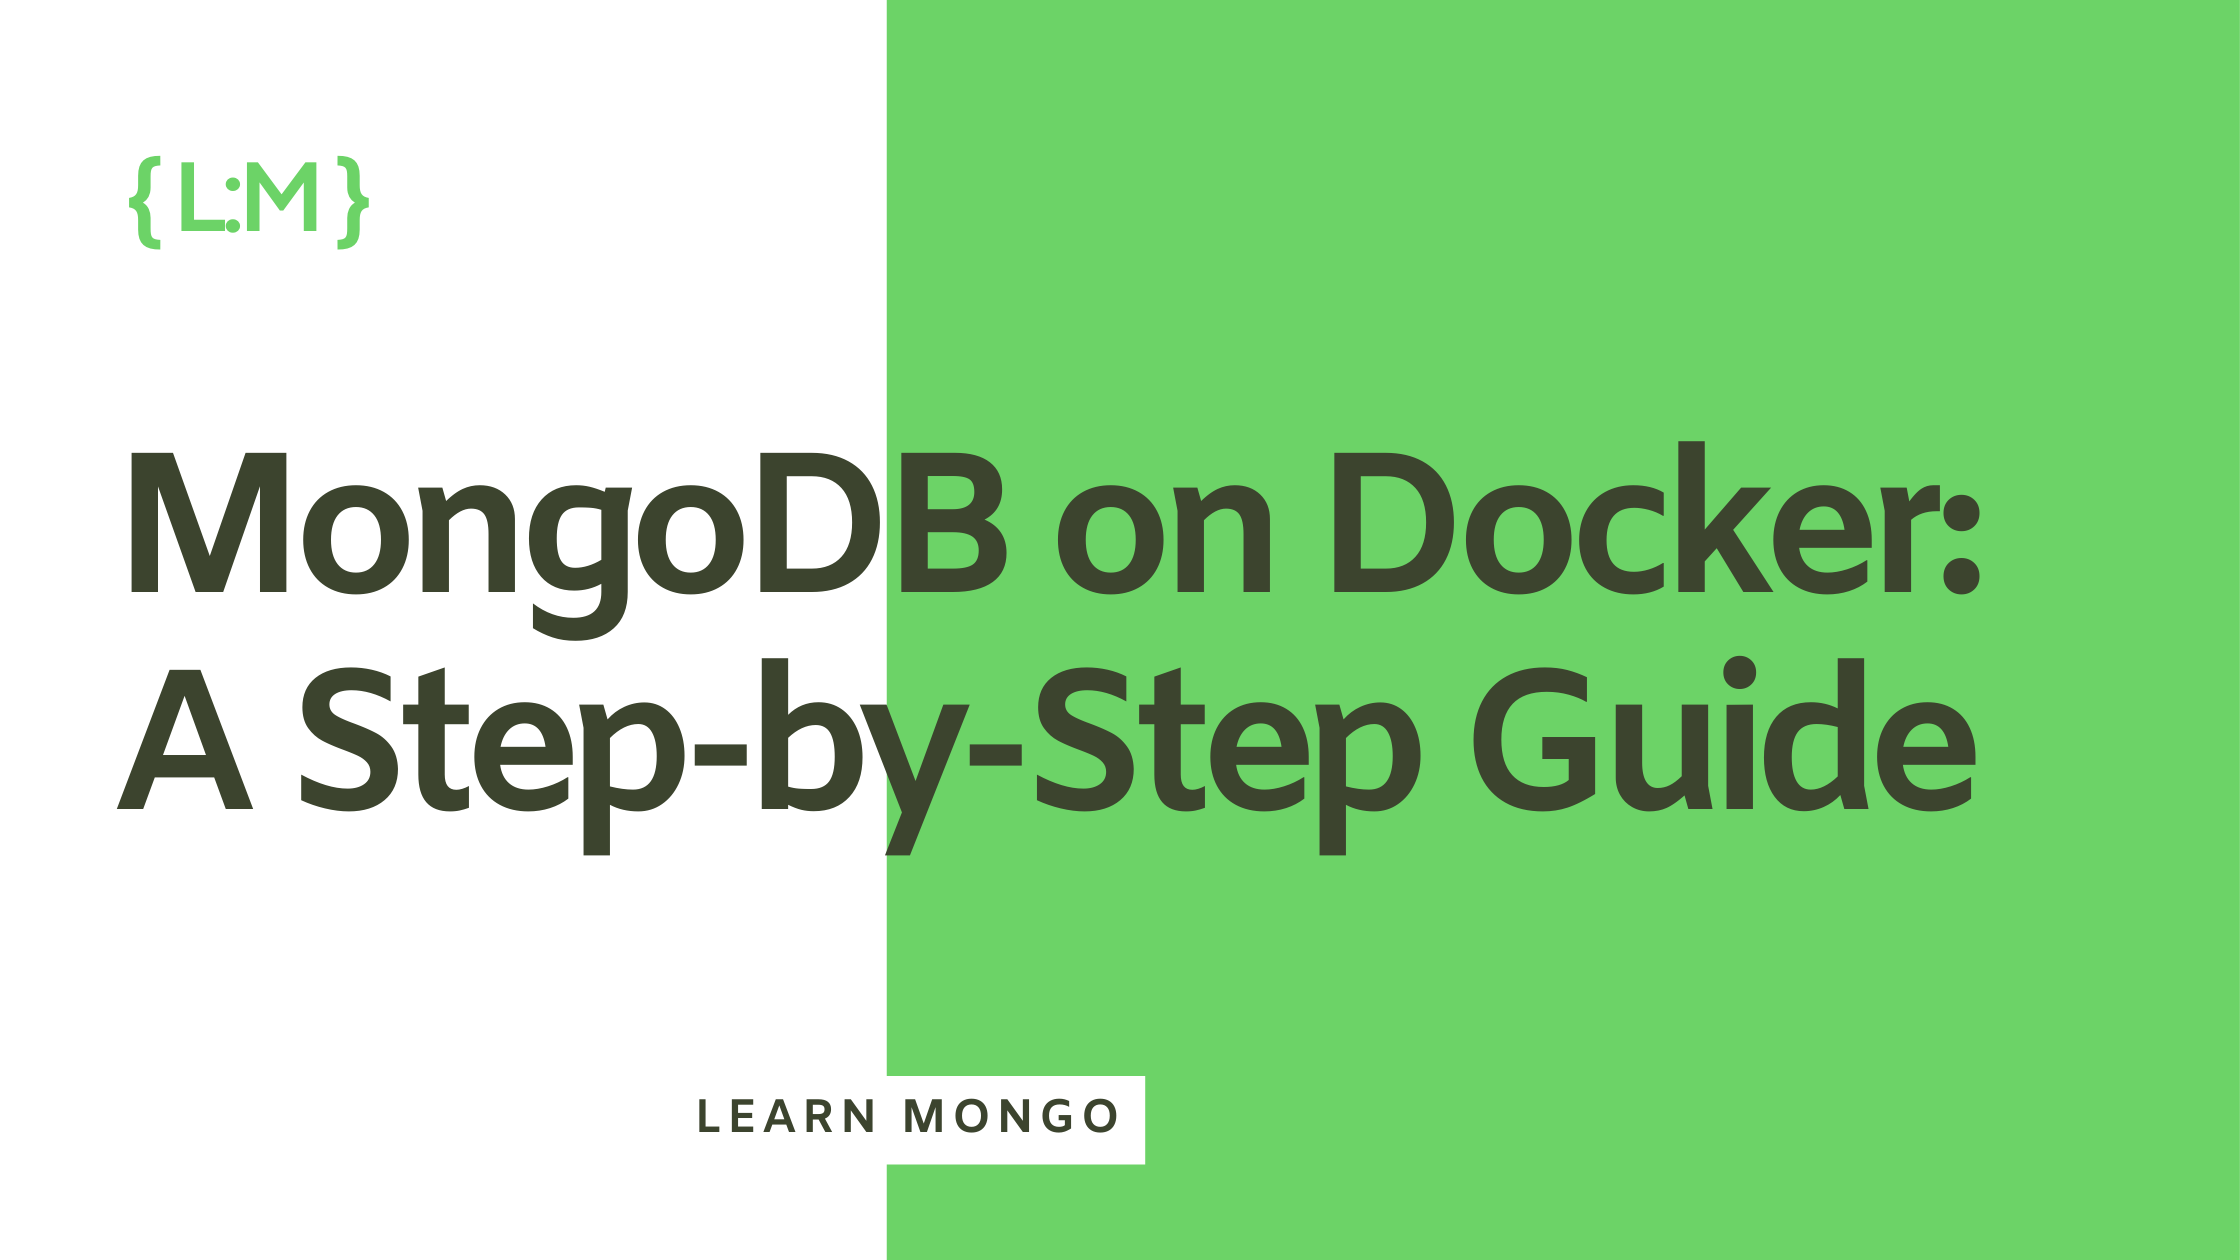 Getting Started with MongoDB on Docker: A Step-by-Step Guide